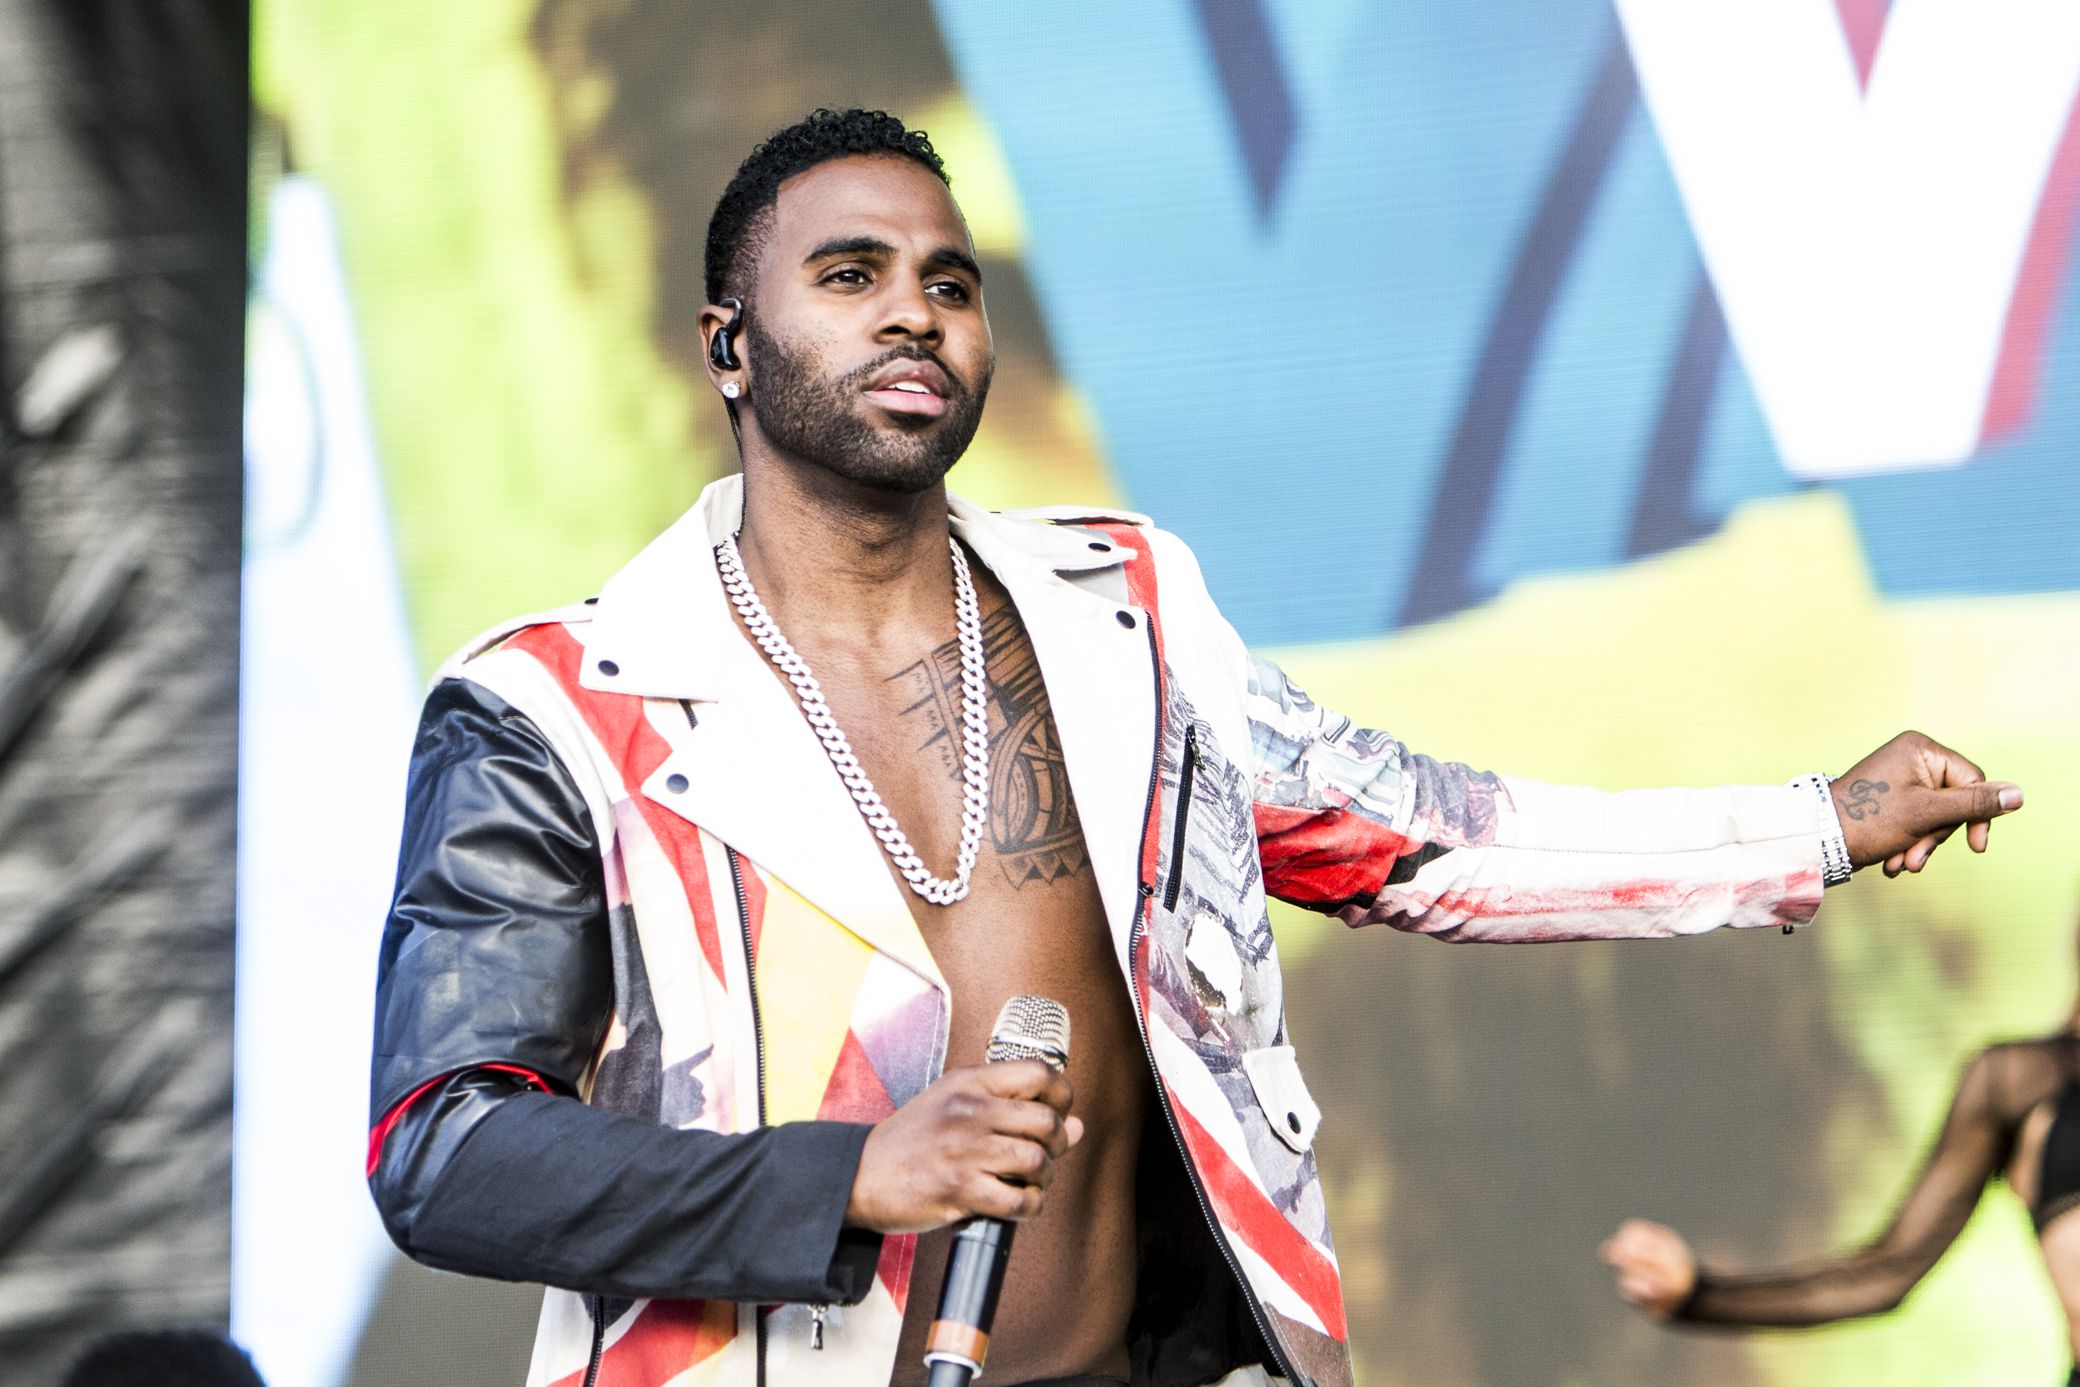 jason derulo 1 KAABOO Del Mar Succeeds at Being a Festival for Everyone